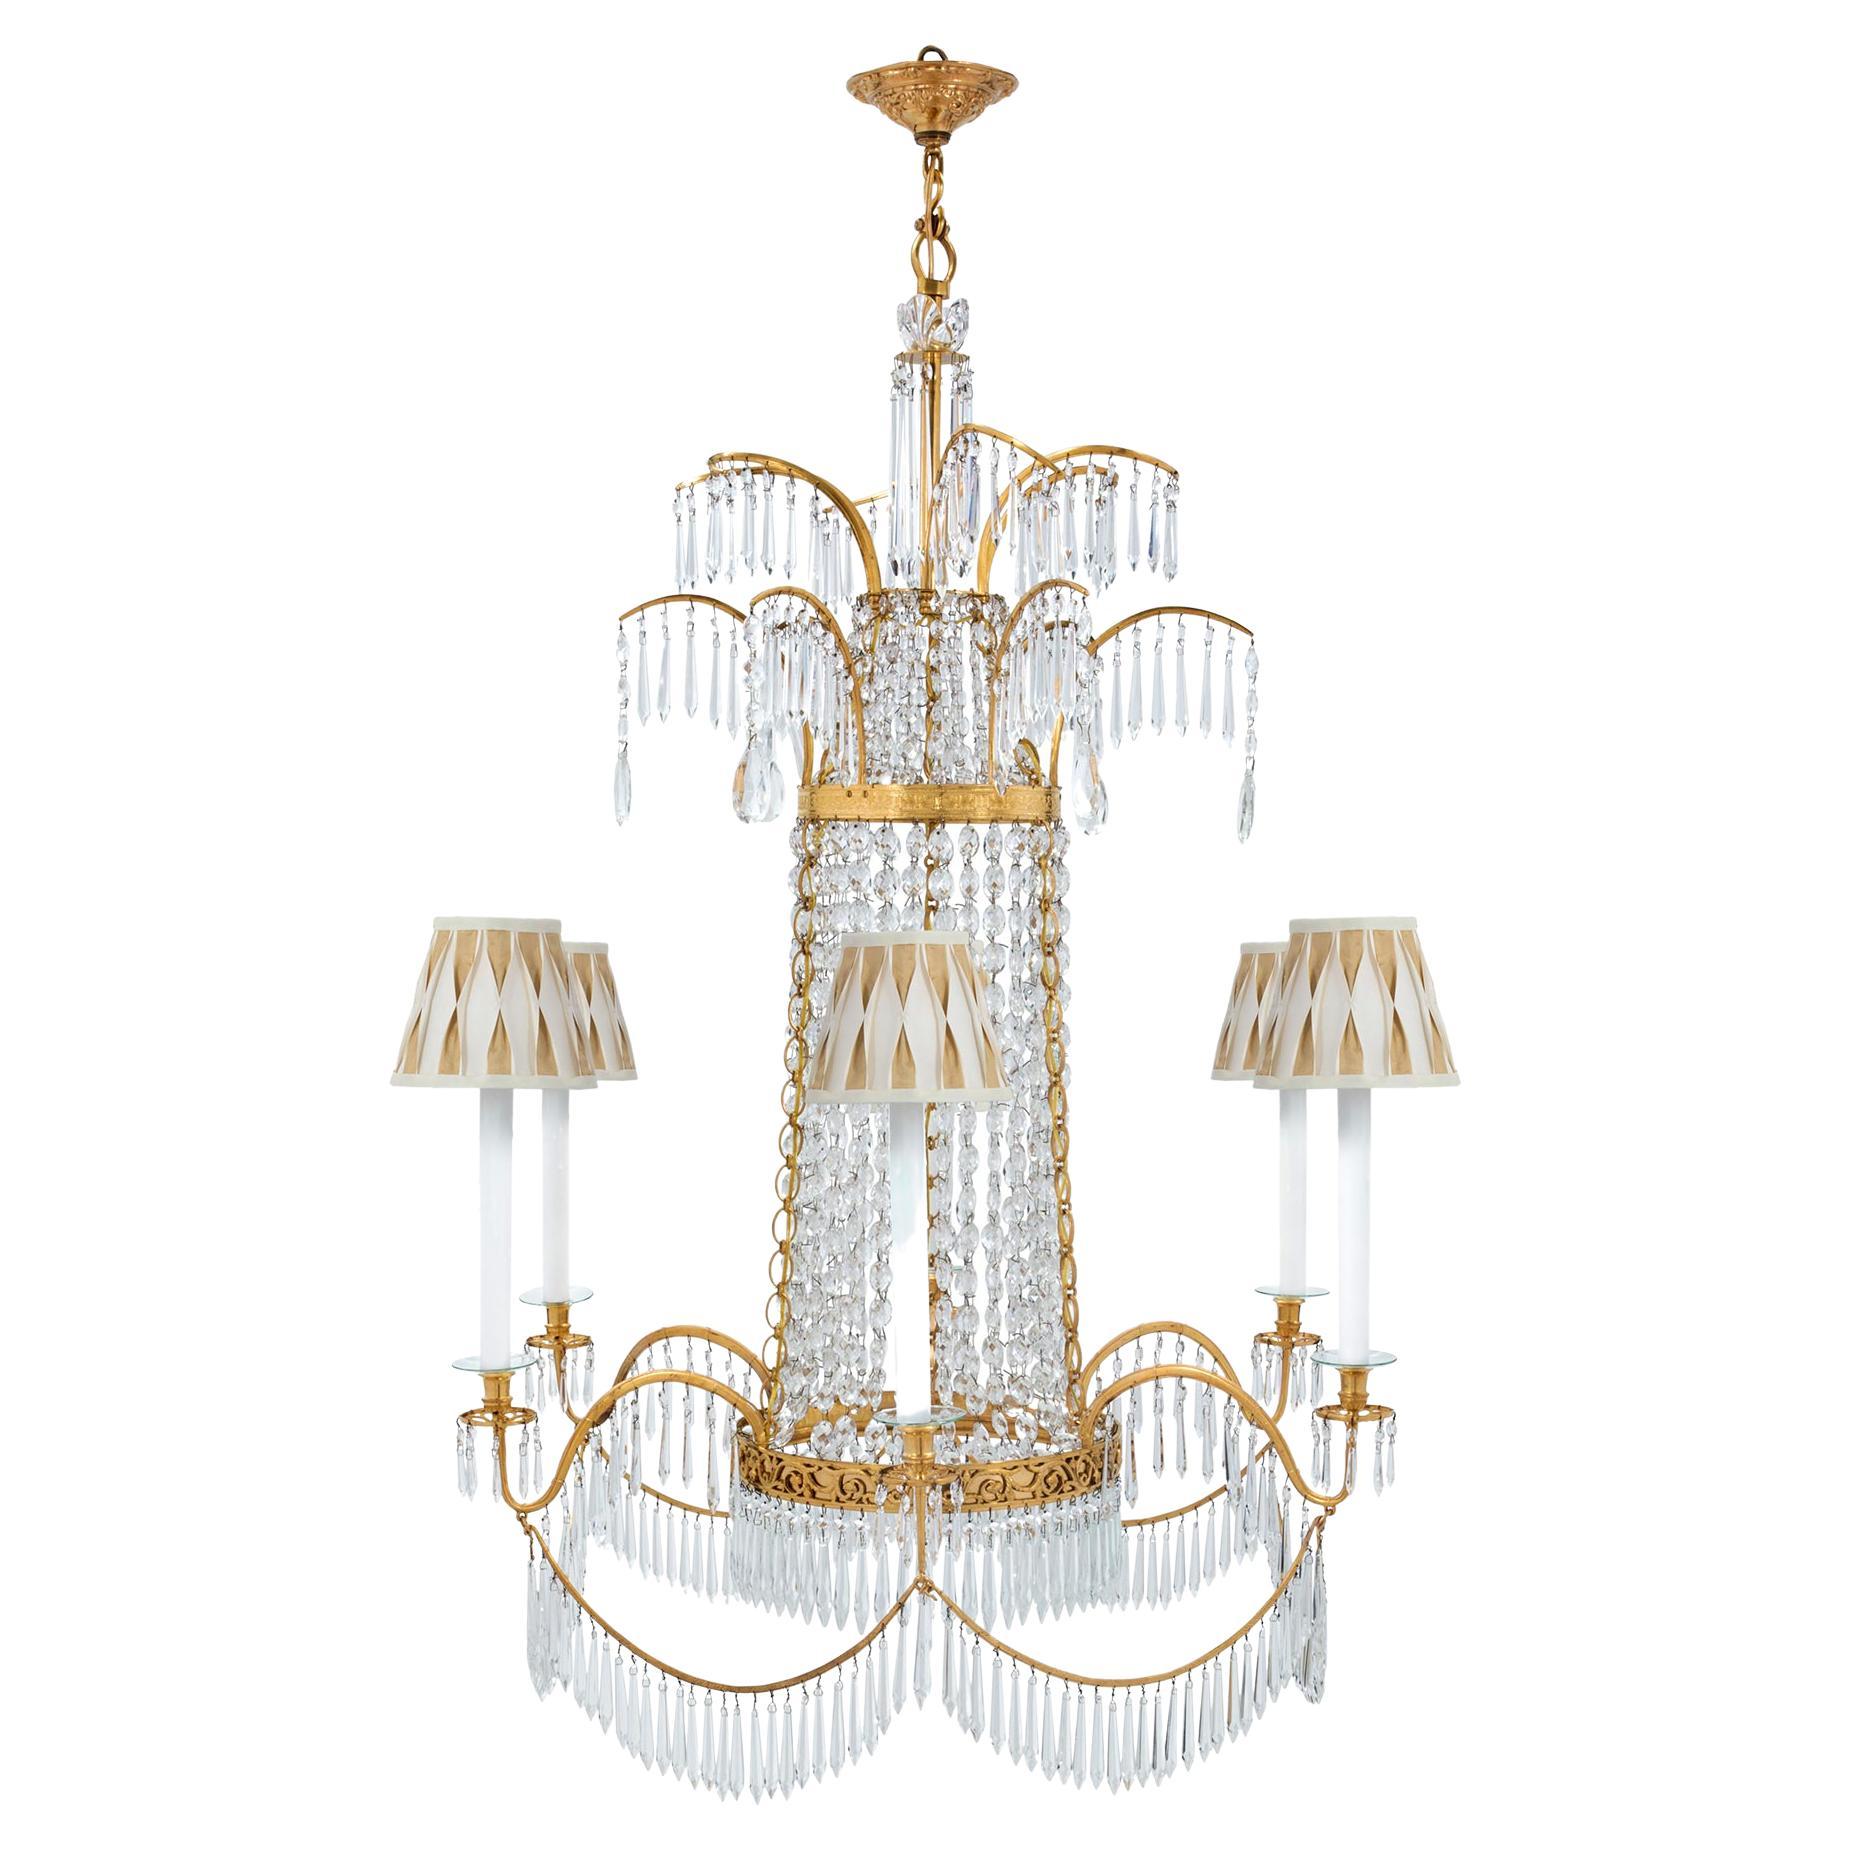 Russian 19th Century Neoclassical Ormolu and Crystal Six-Light Chandelier For Sale